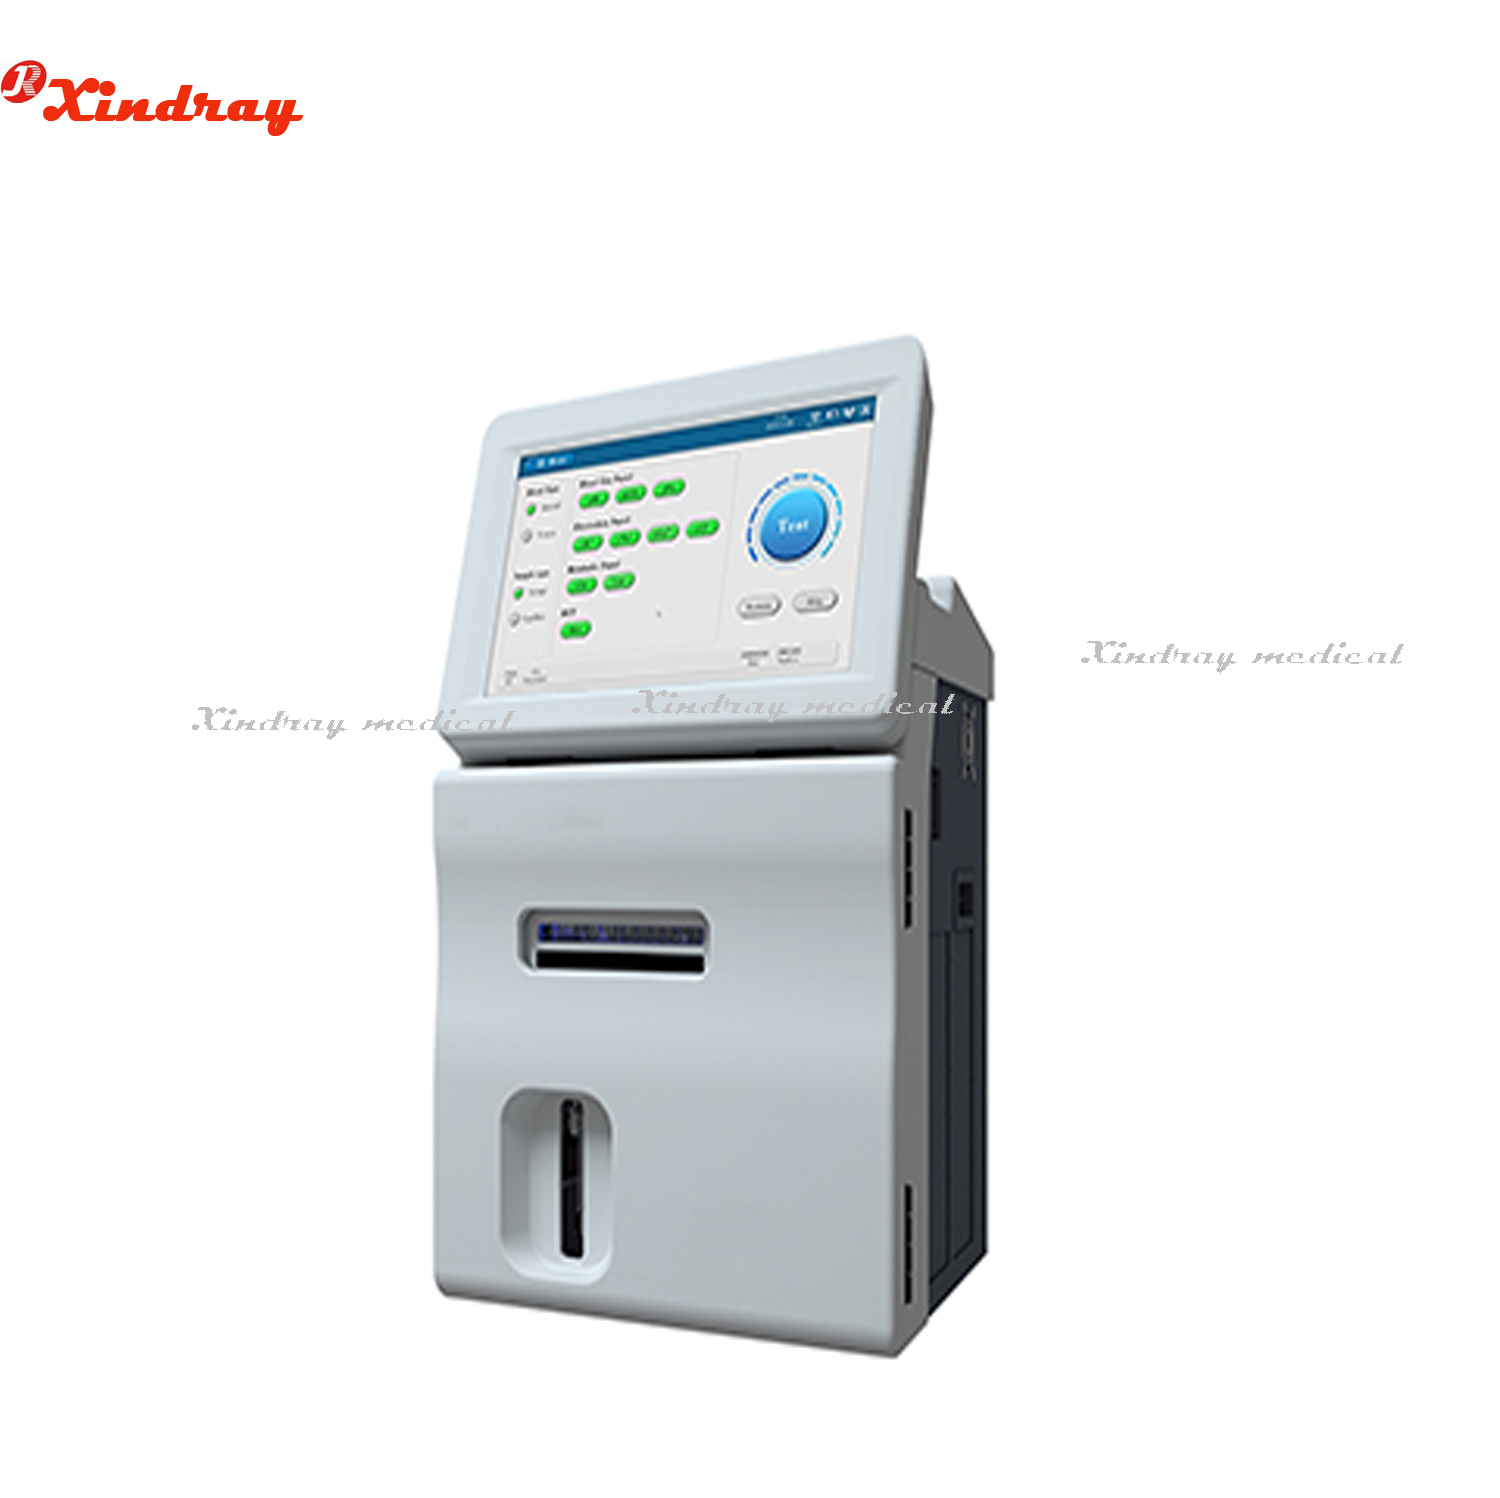 pO2/pCO2/pH Dry Lactate-glucose Electrode Arterial Blood Gas Analyzer